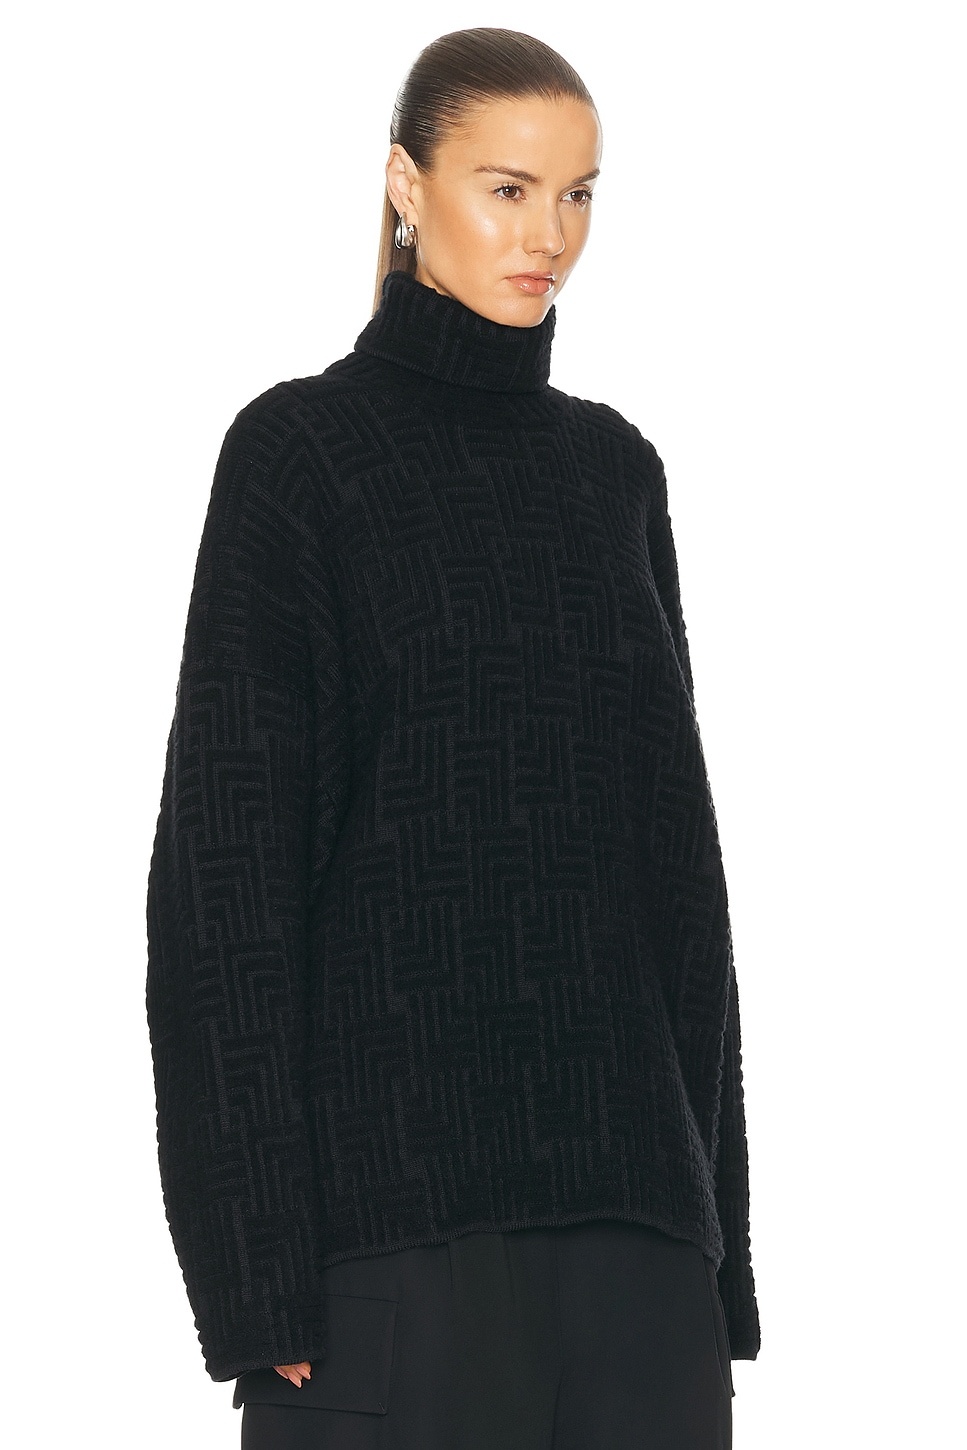 Straight Neck Relaxed Sweater - 2